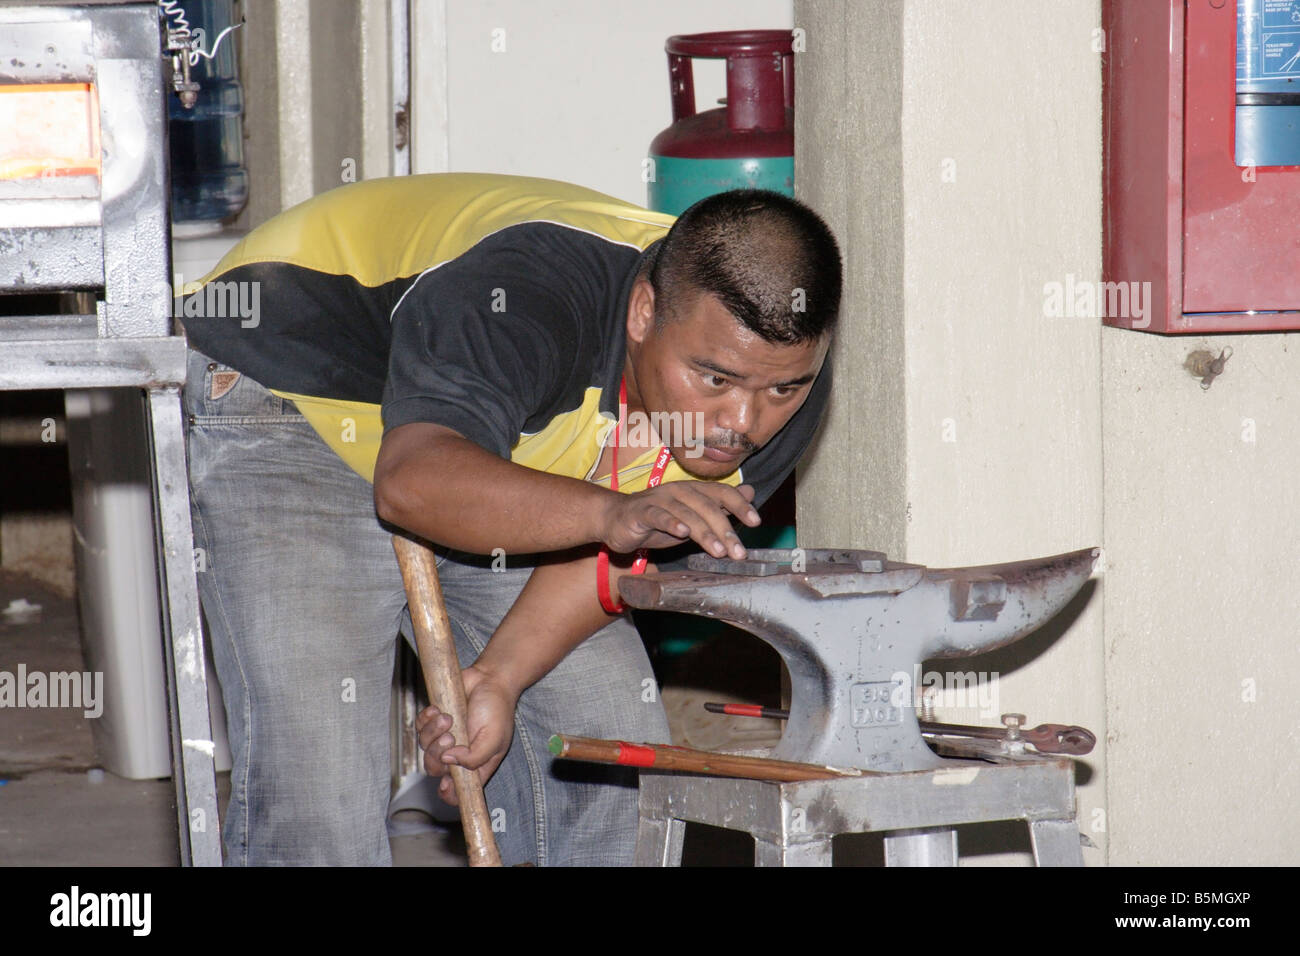 A blacksmith working on a horse shoe at an exhibition in Terengganu, Malaysia Stock Photo